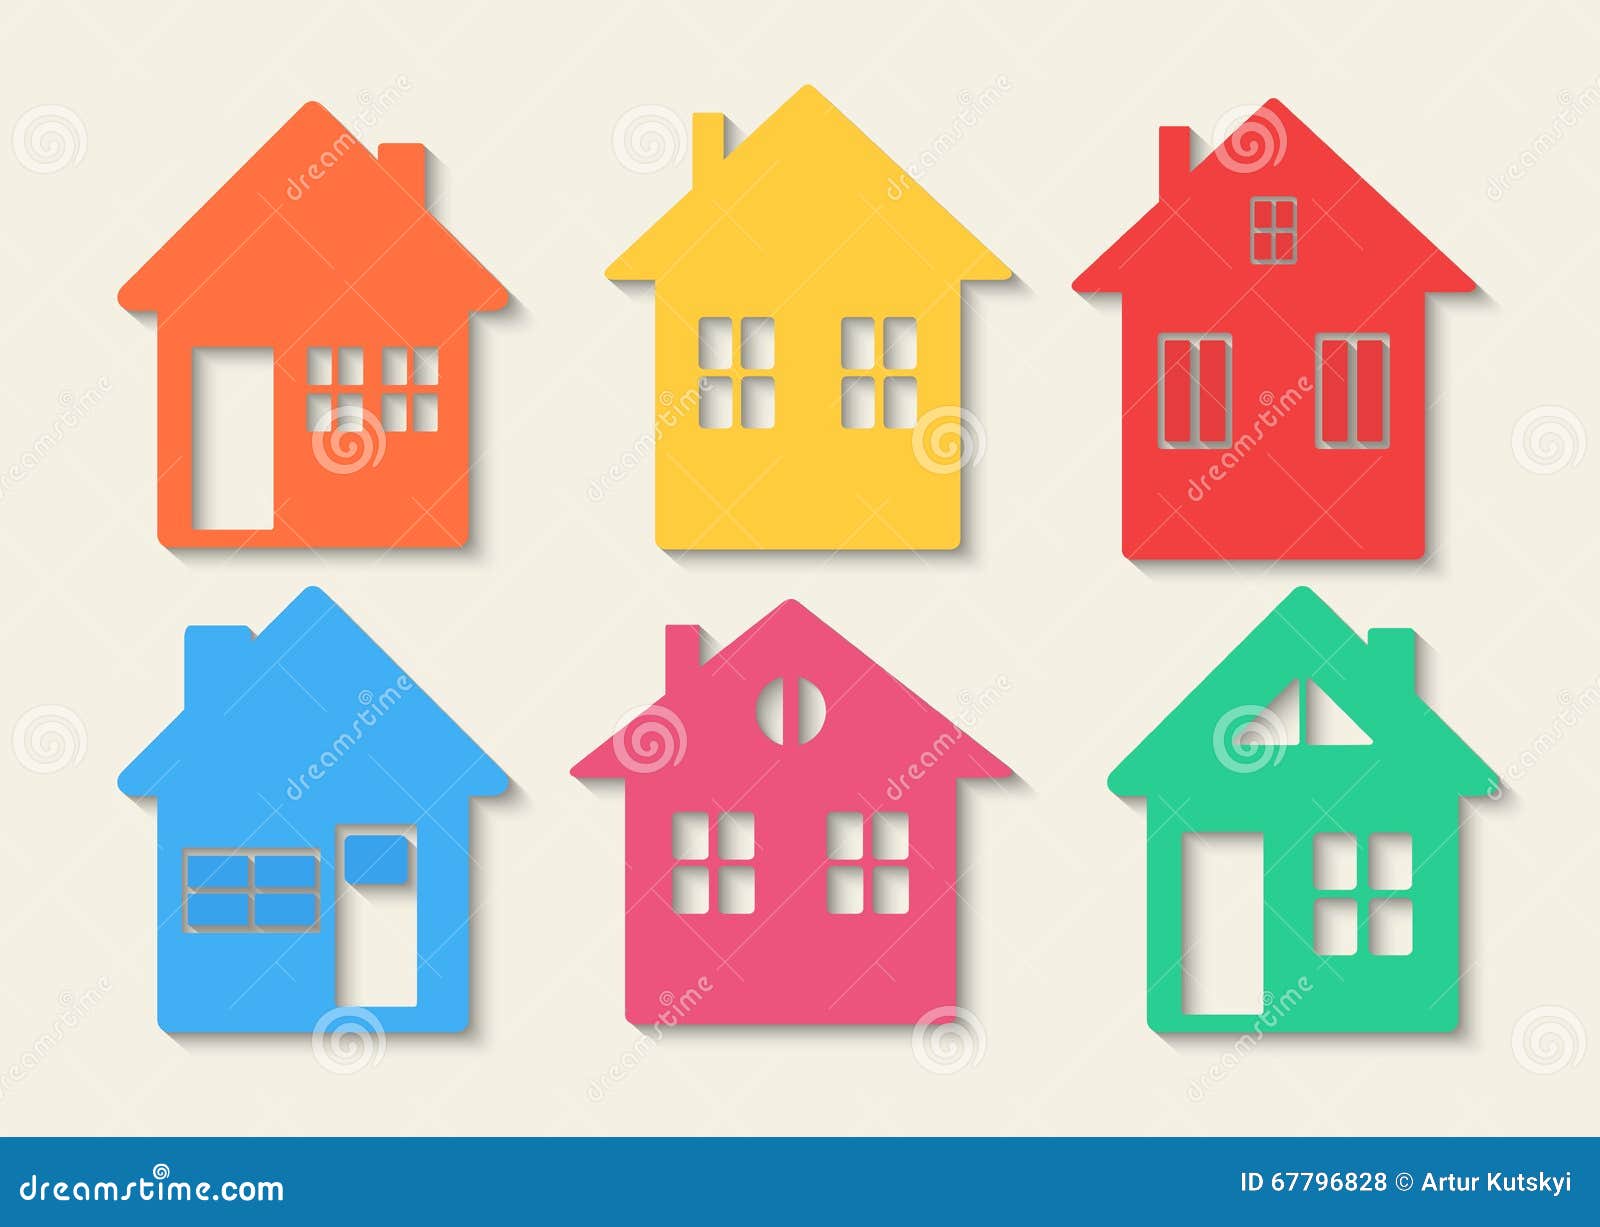 Houses Icons Set. Real Estate. Colourful Home Icon Collection Concept ...